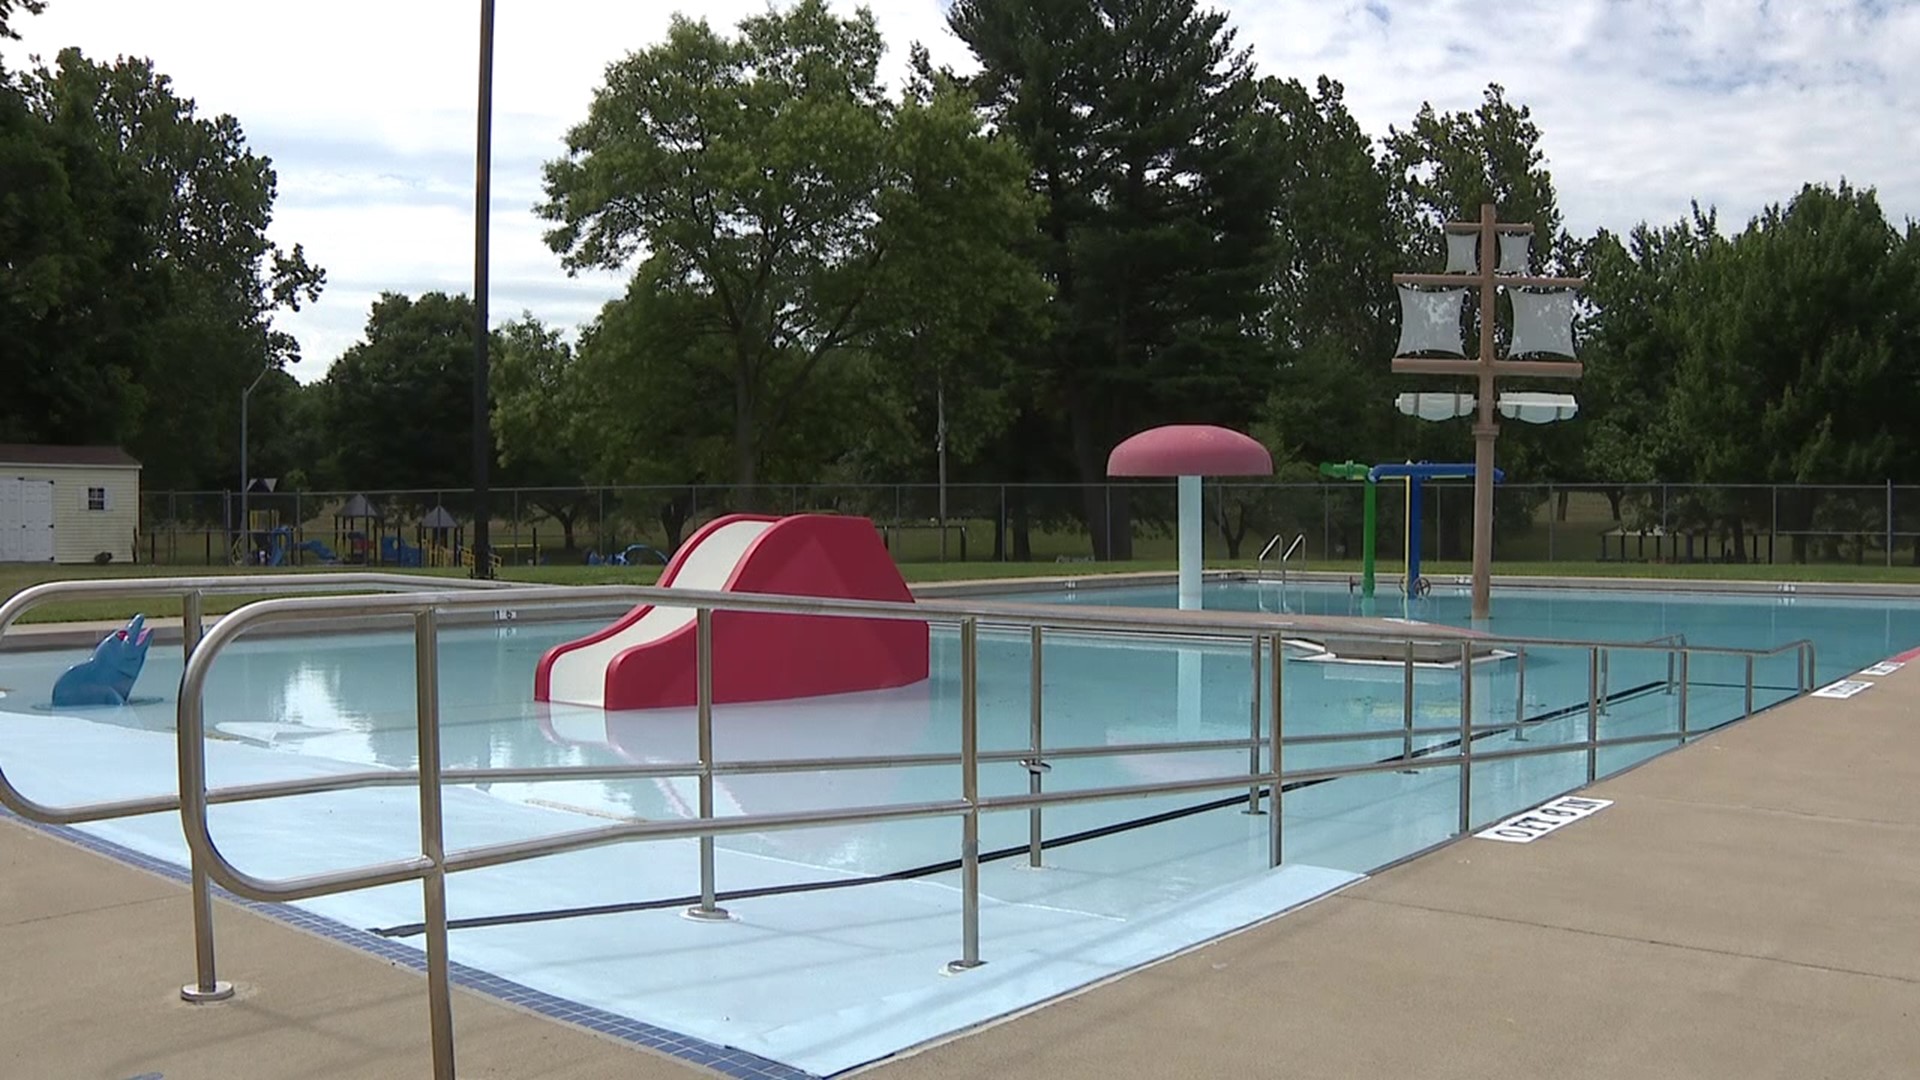 Memorial Pool in Williamsport is back open for those looking to cool off in the summer heat.